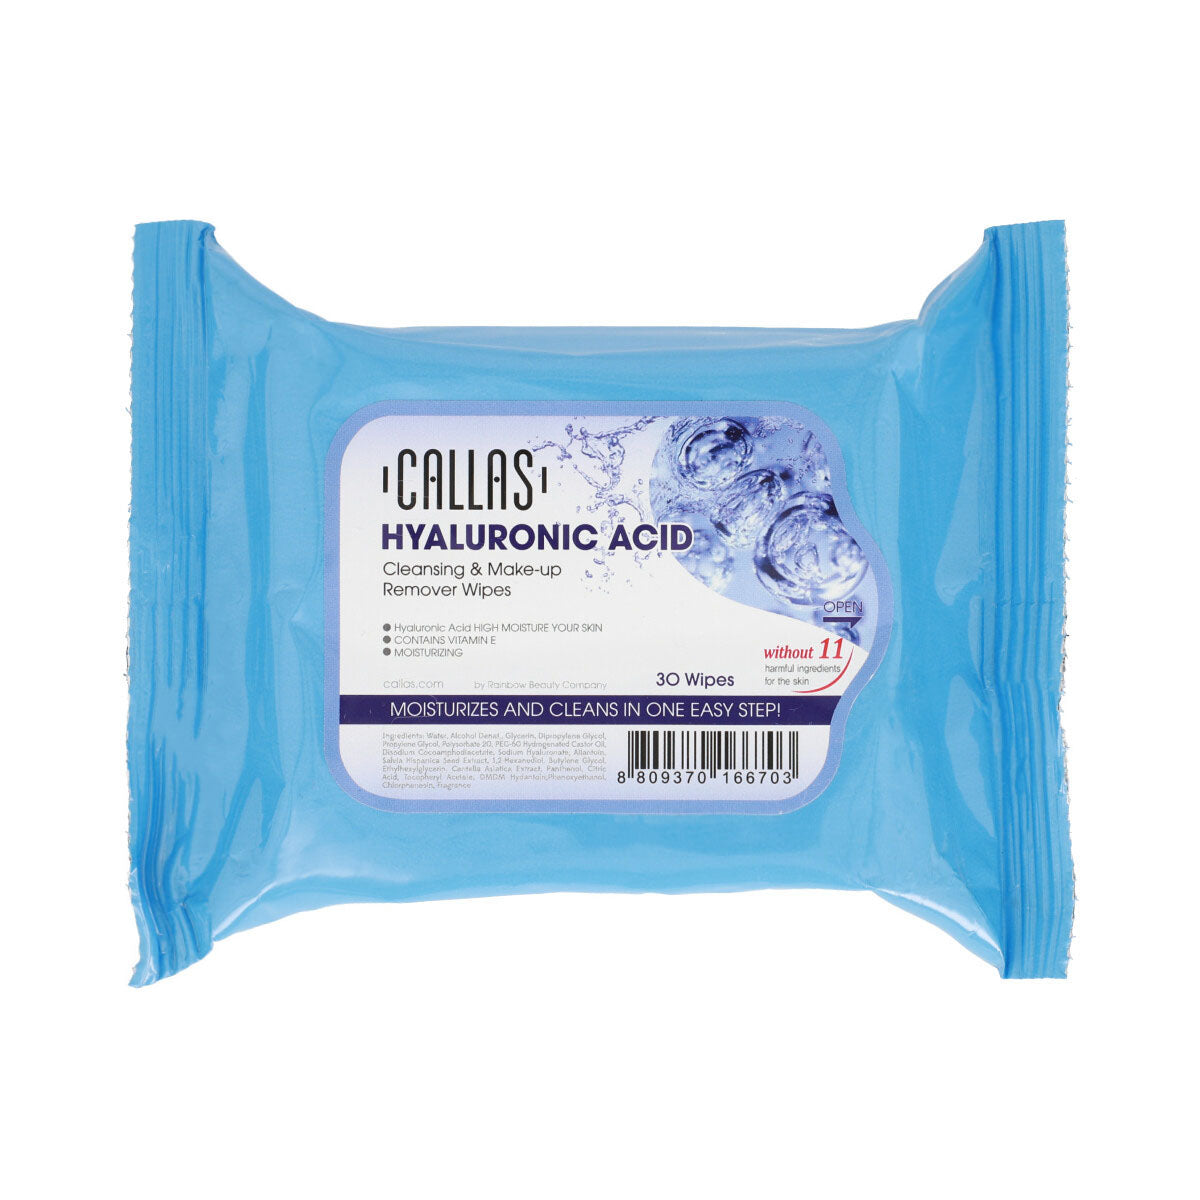 Cleansing and Make Up Remover Hyaluronic Acid